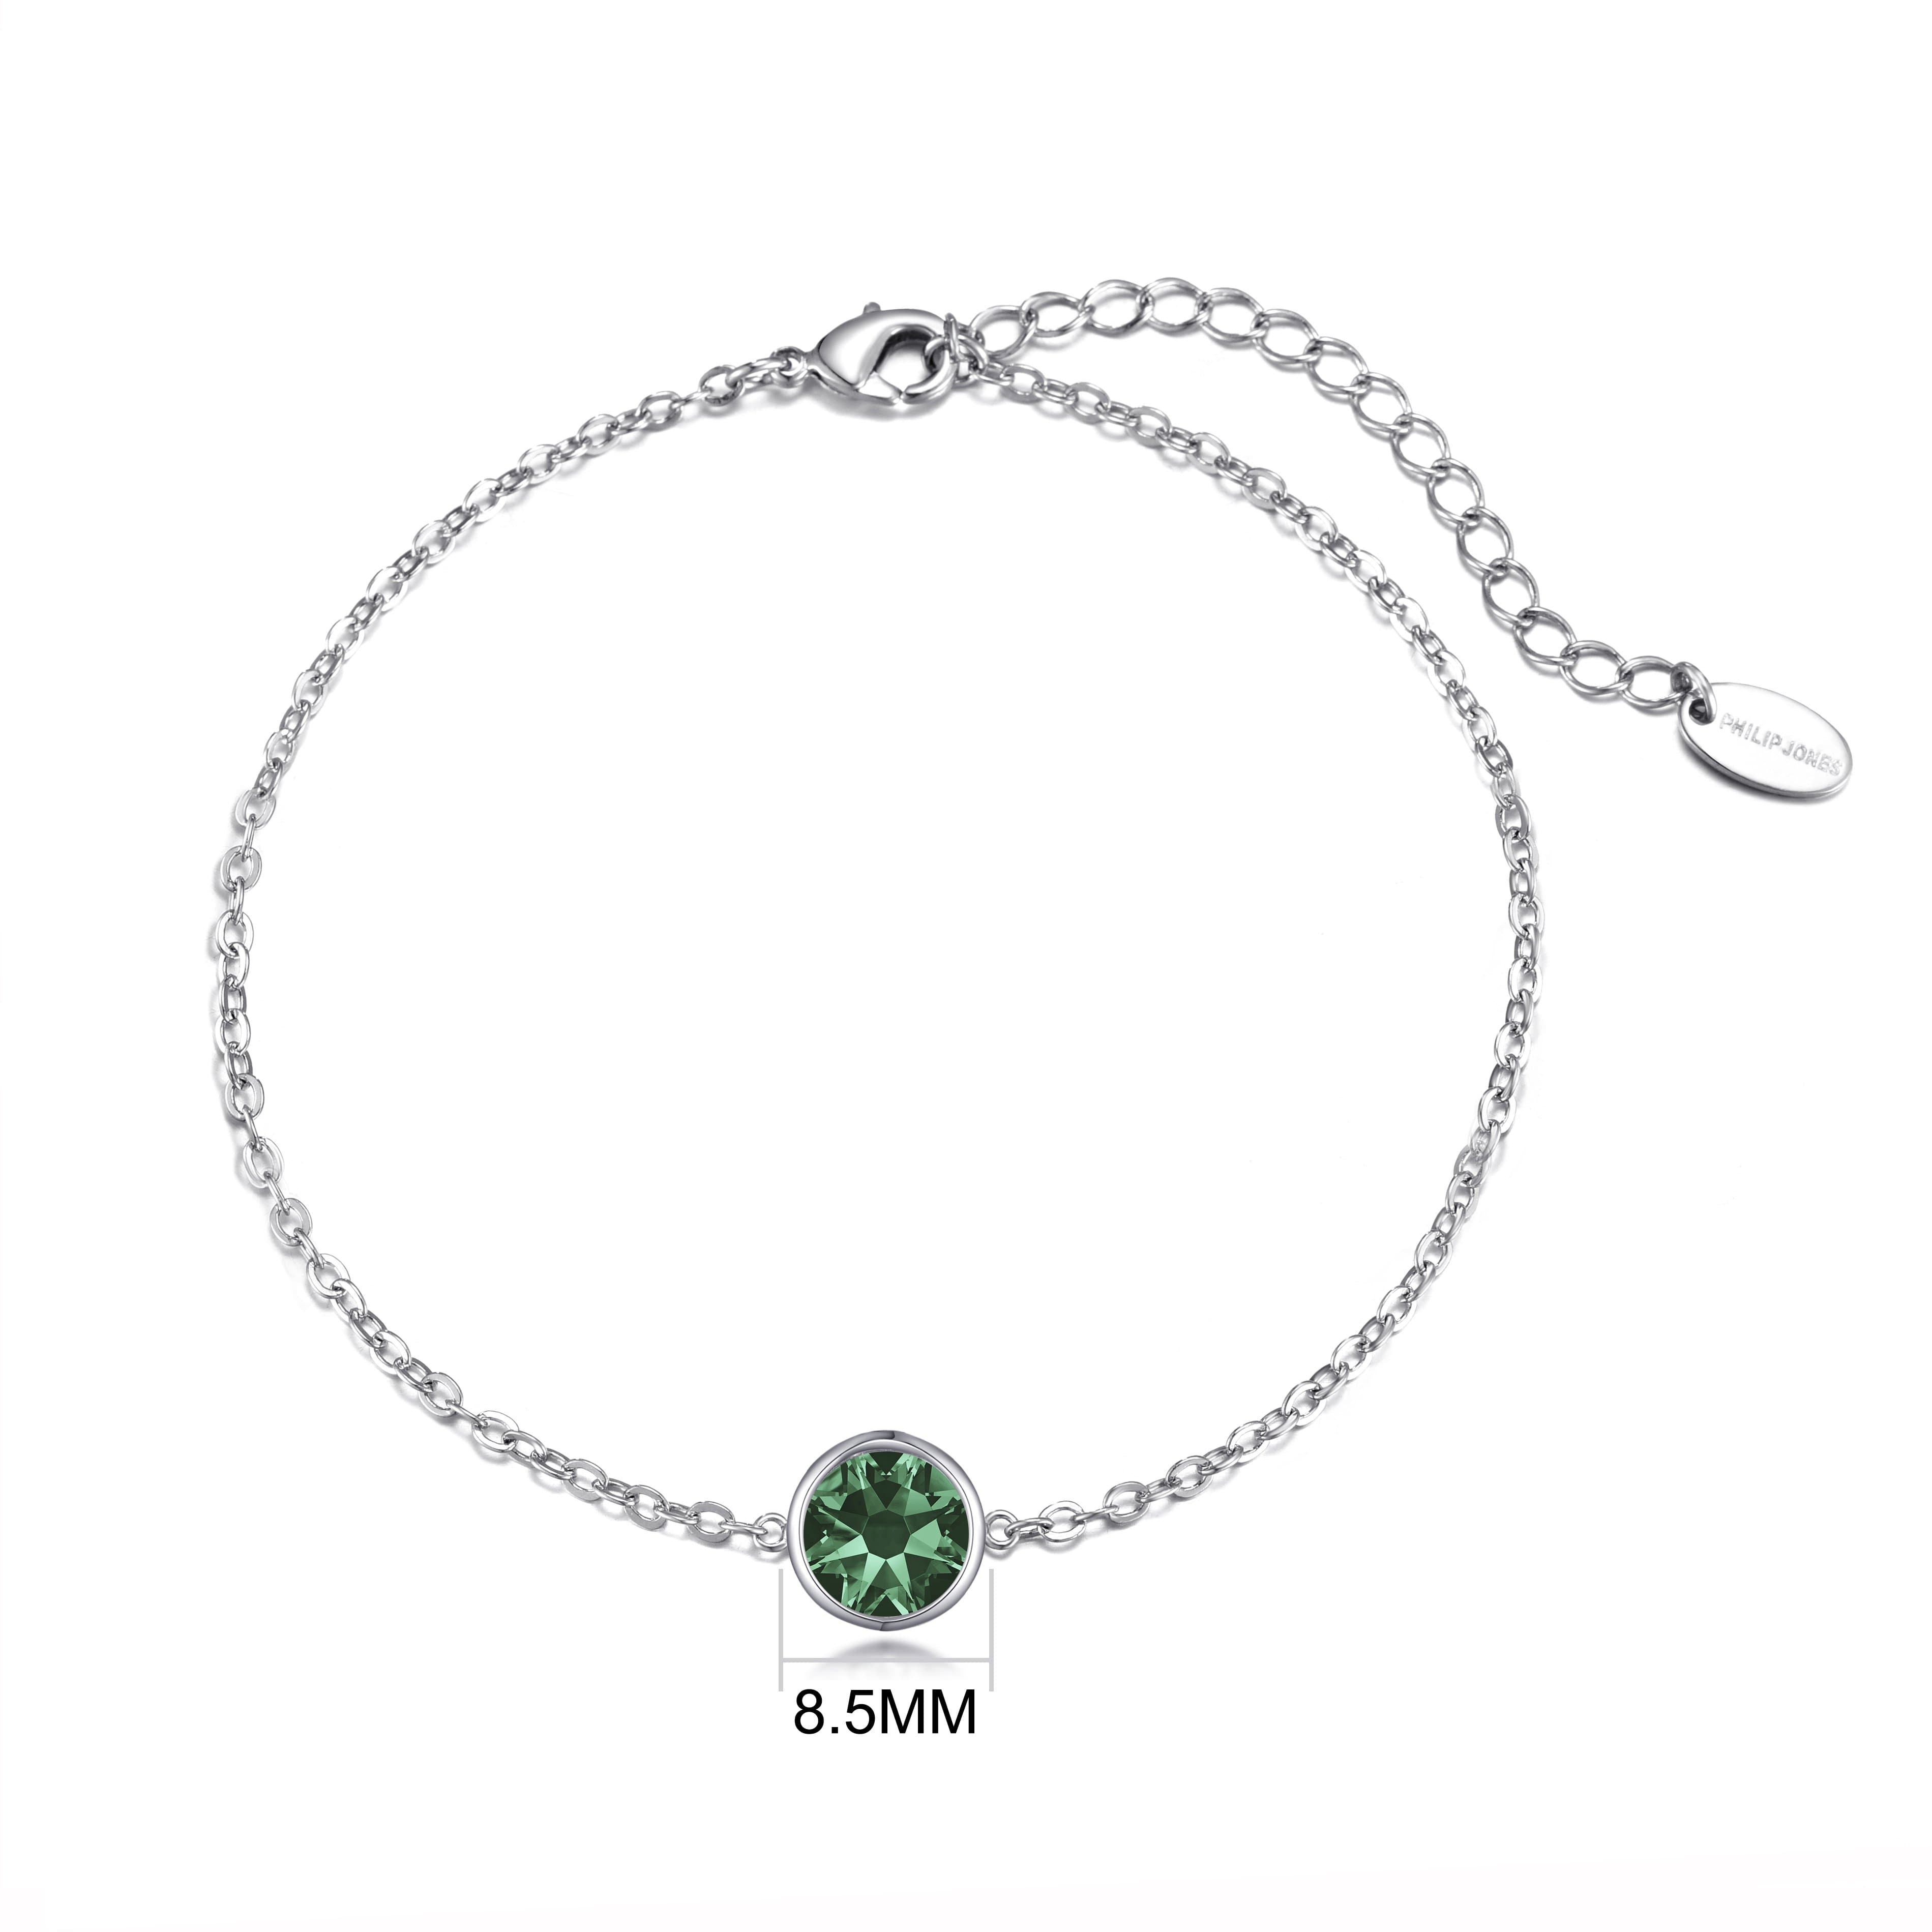 May (Emerald) Birthstone Anklet Created with Zircondia® Crystals